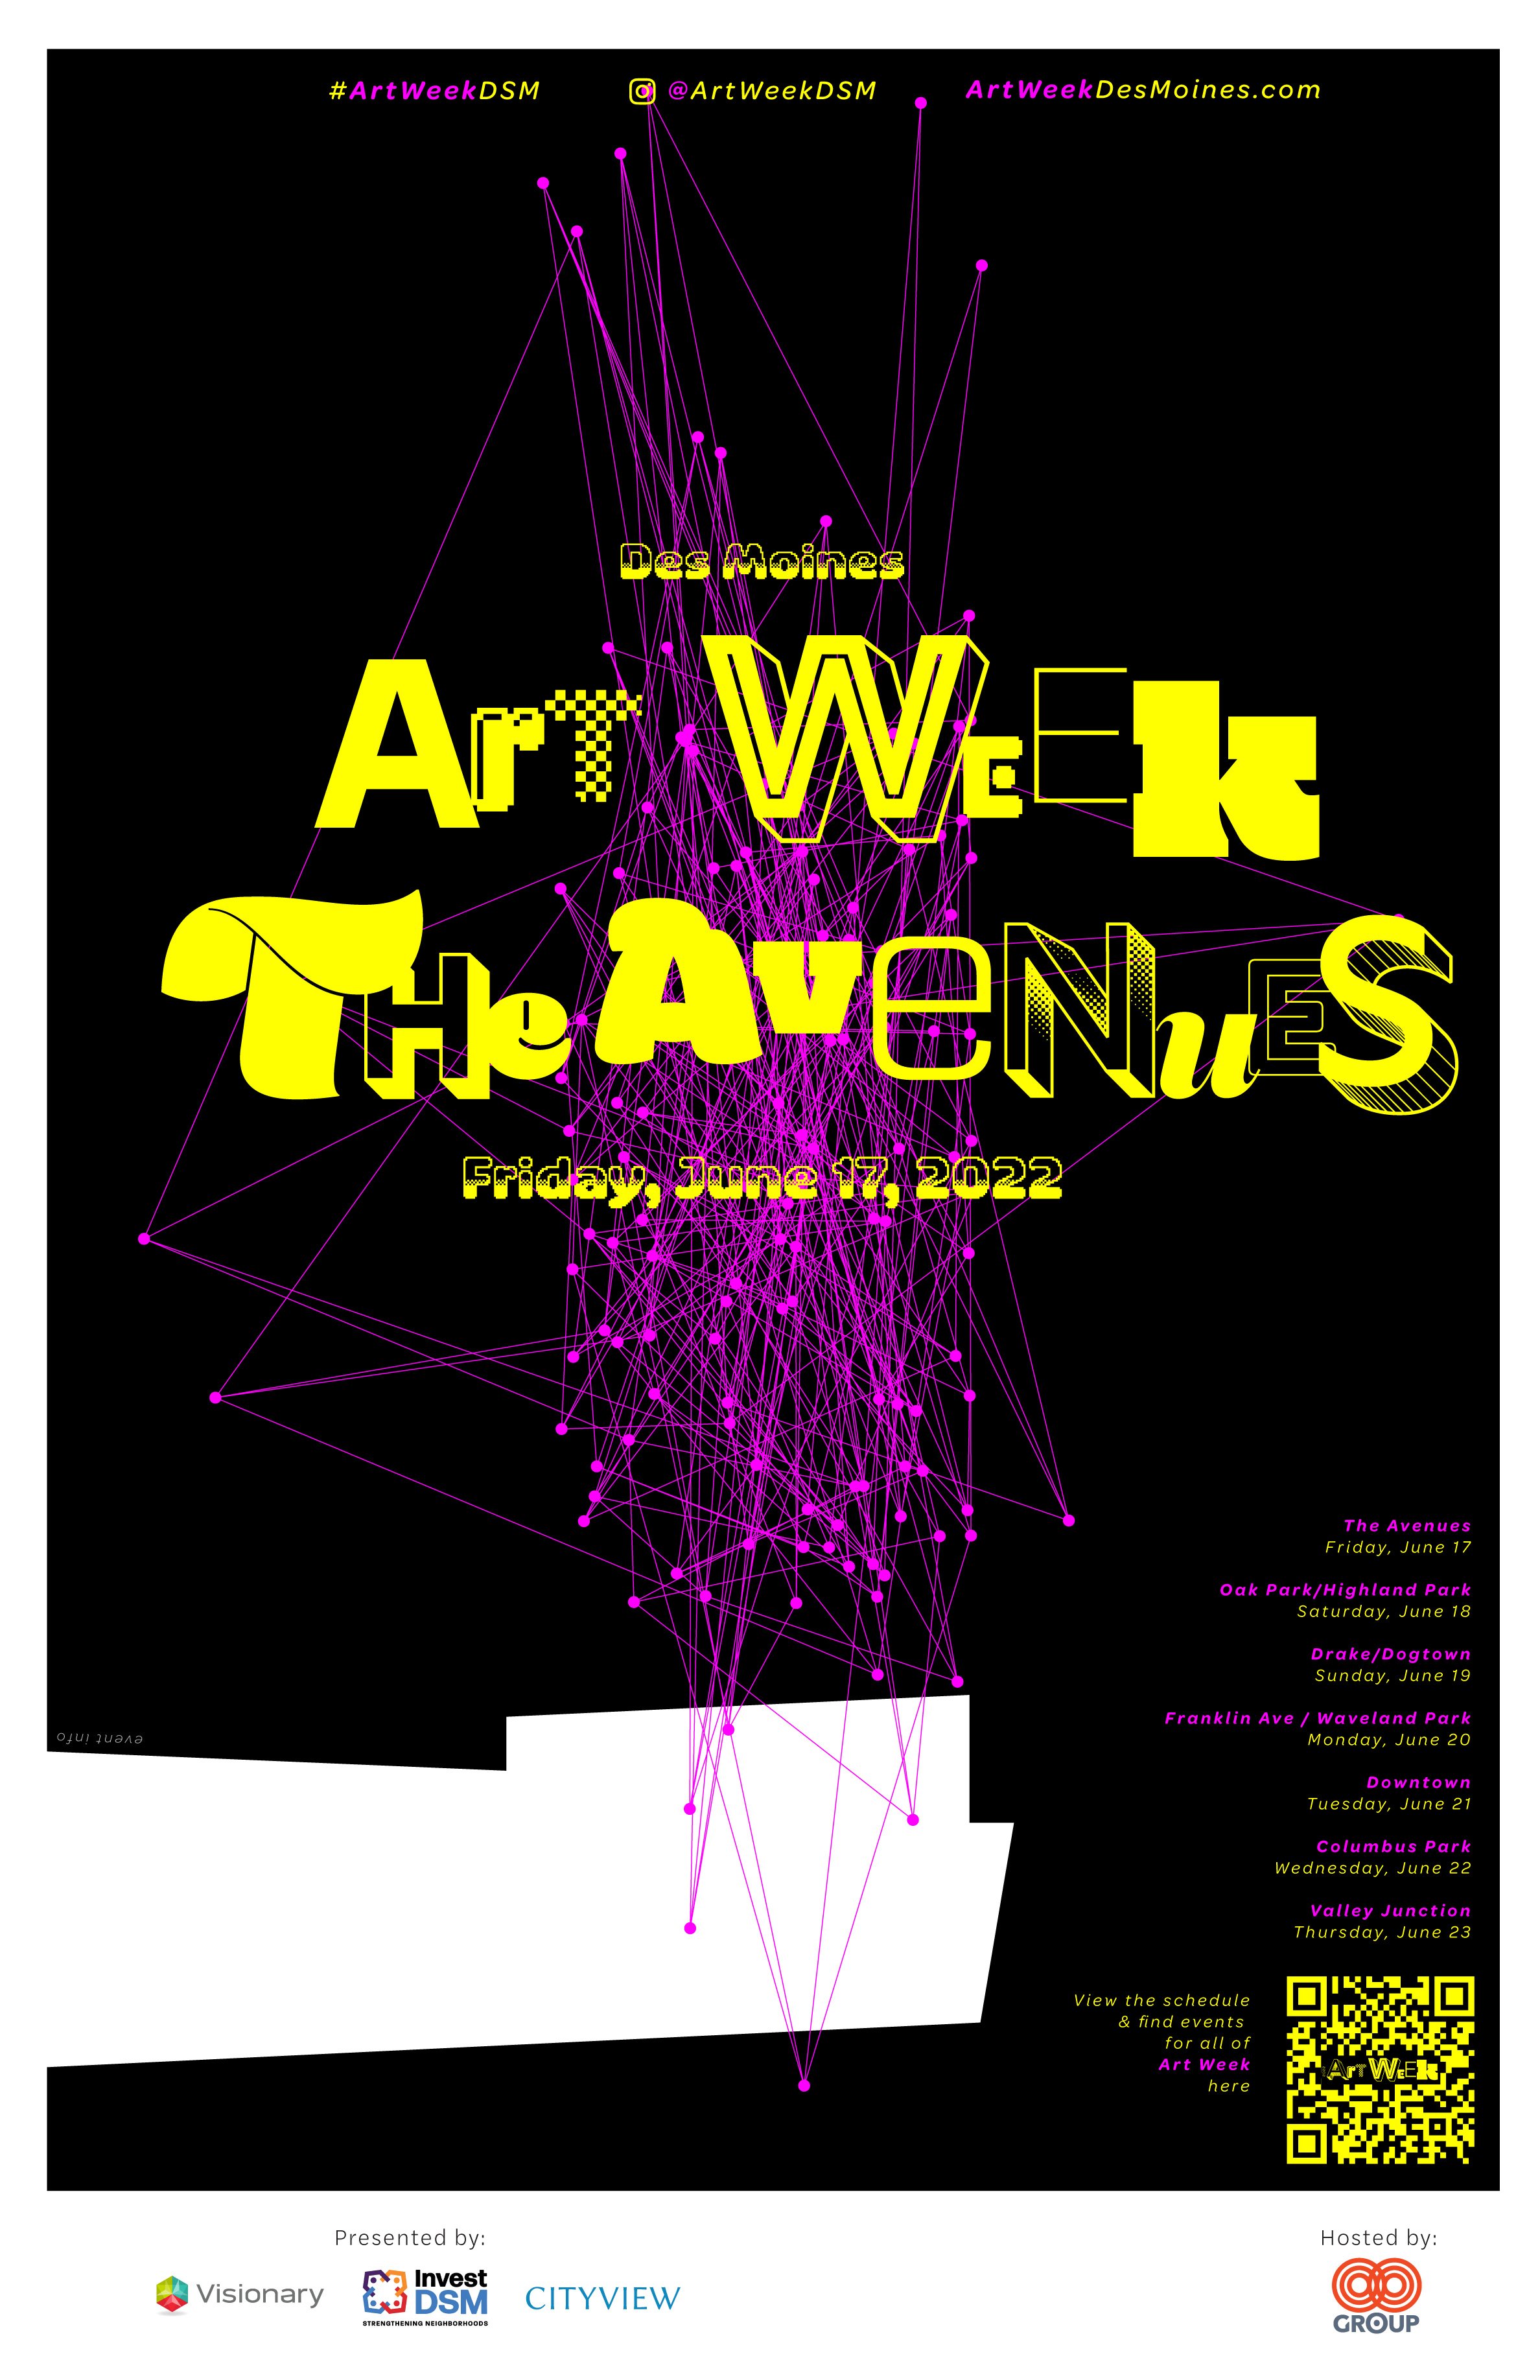 Write-in-Area-2022 Art Week - Daily Poster - The Avenues@3x-80.jpg